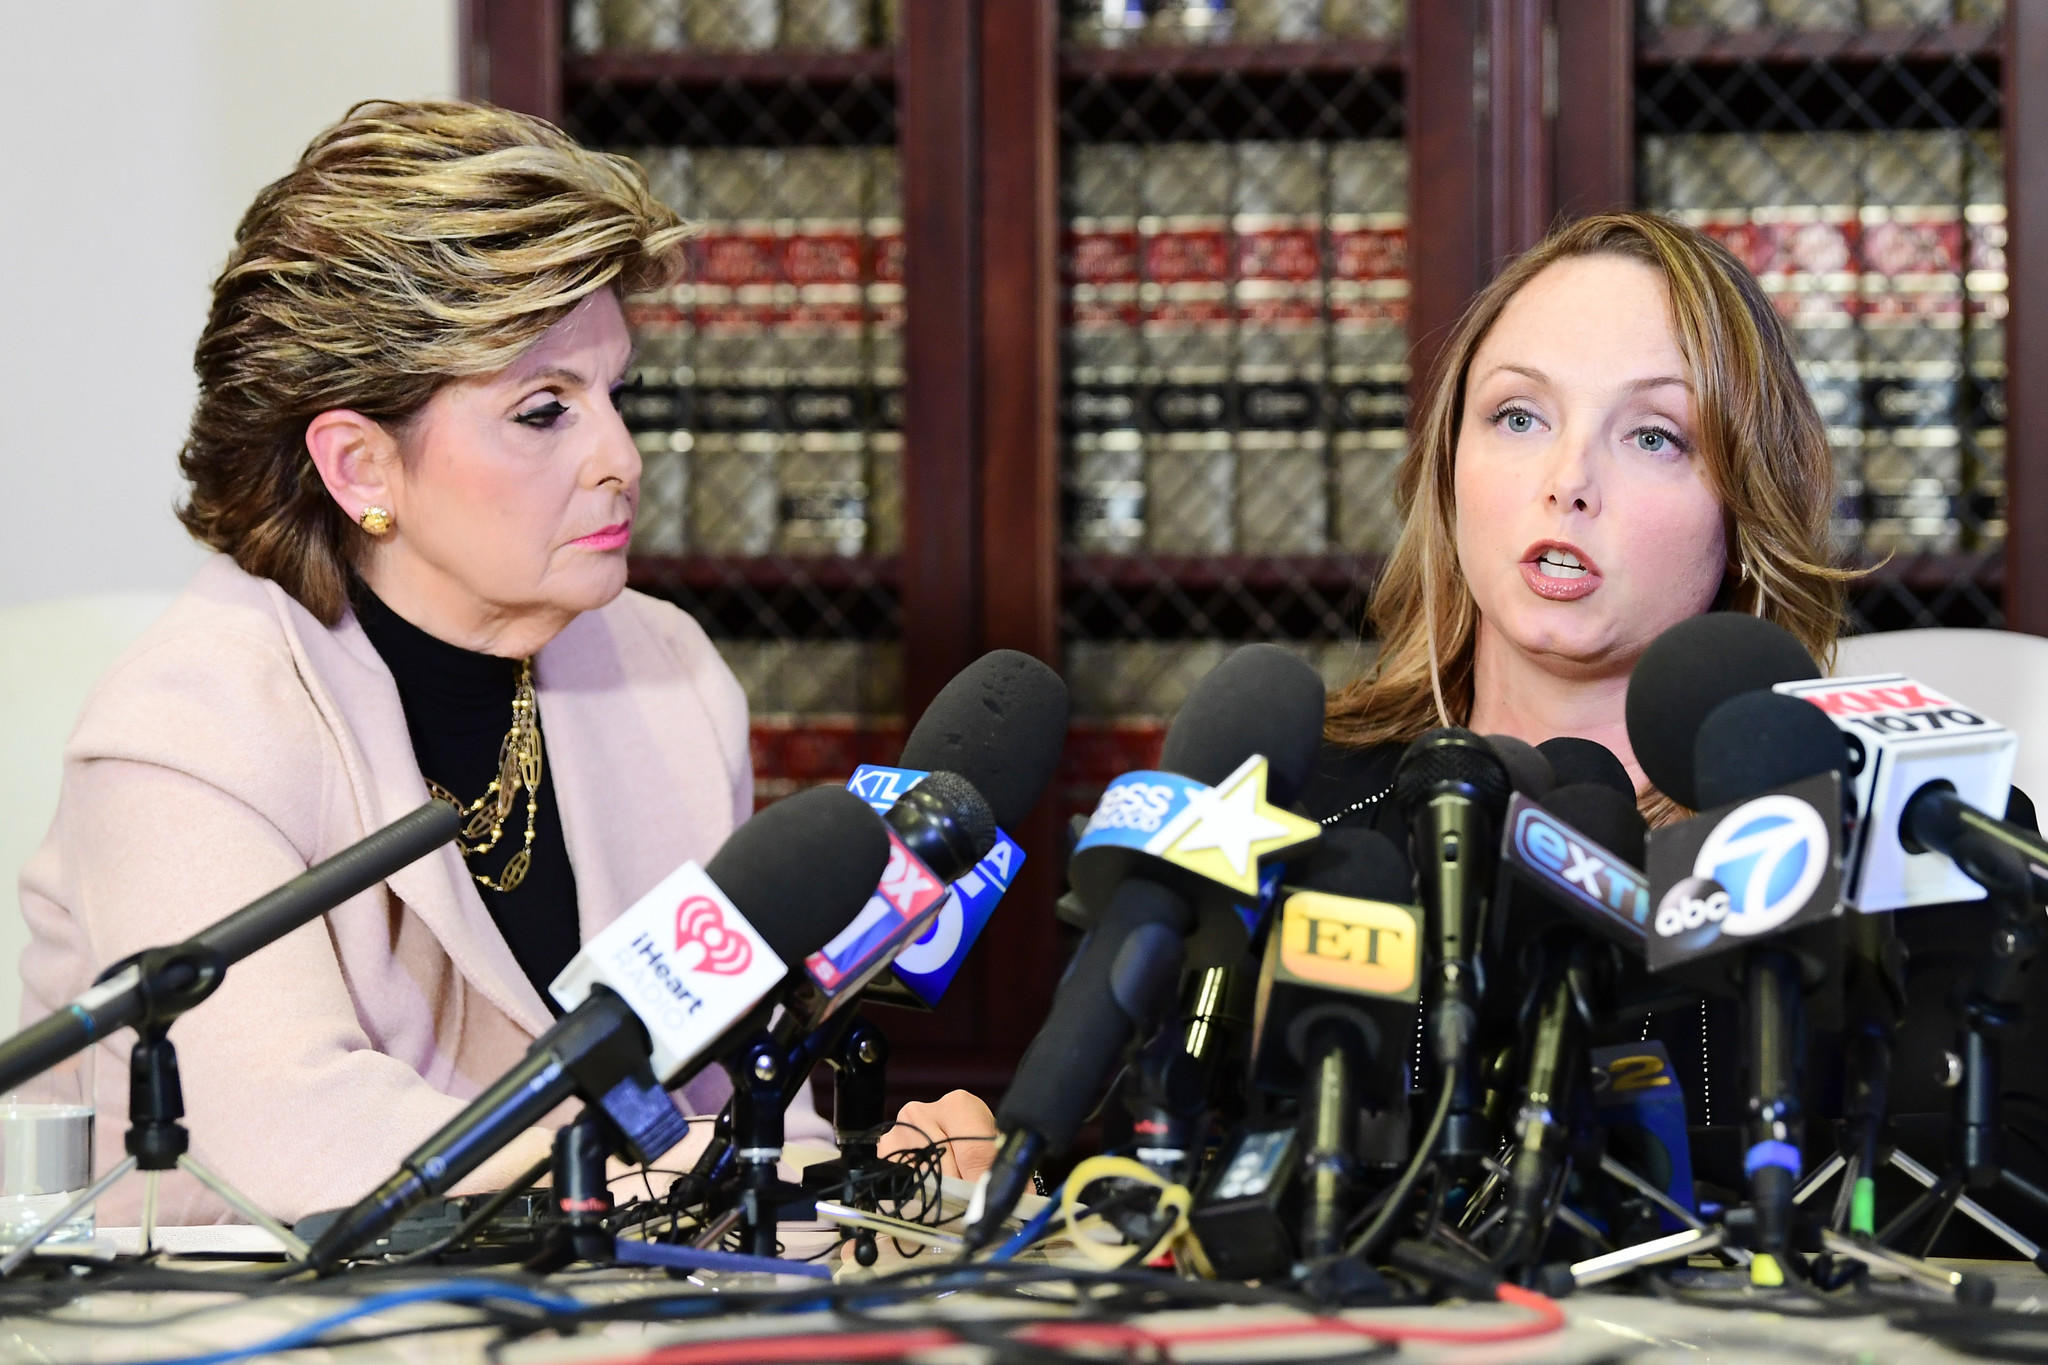 Attorney Gloria Allred, left, and client Louisette Geiss speak during a news conference at Allred's office on Tuesday. (Emma McIntyre / Getty Images)